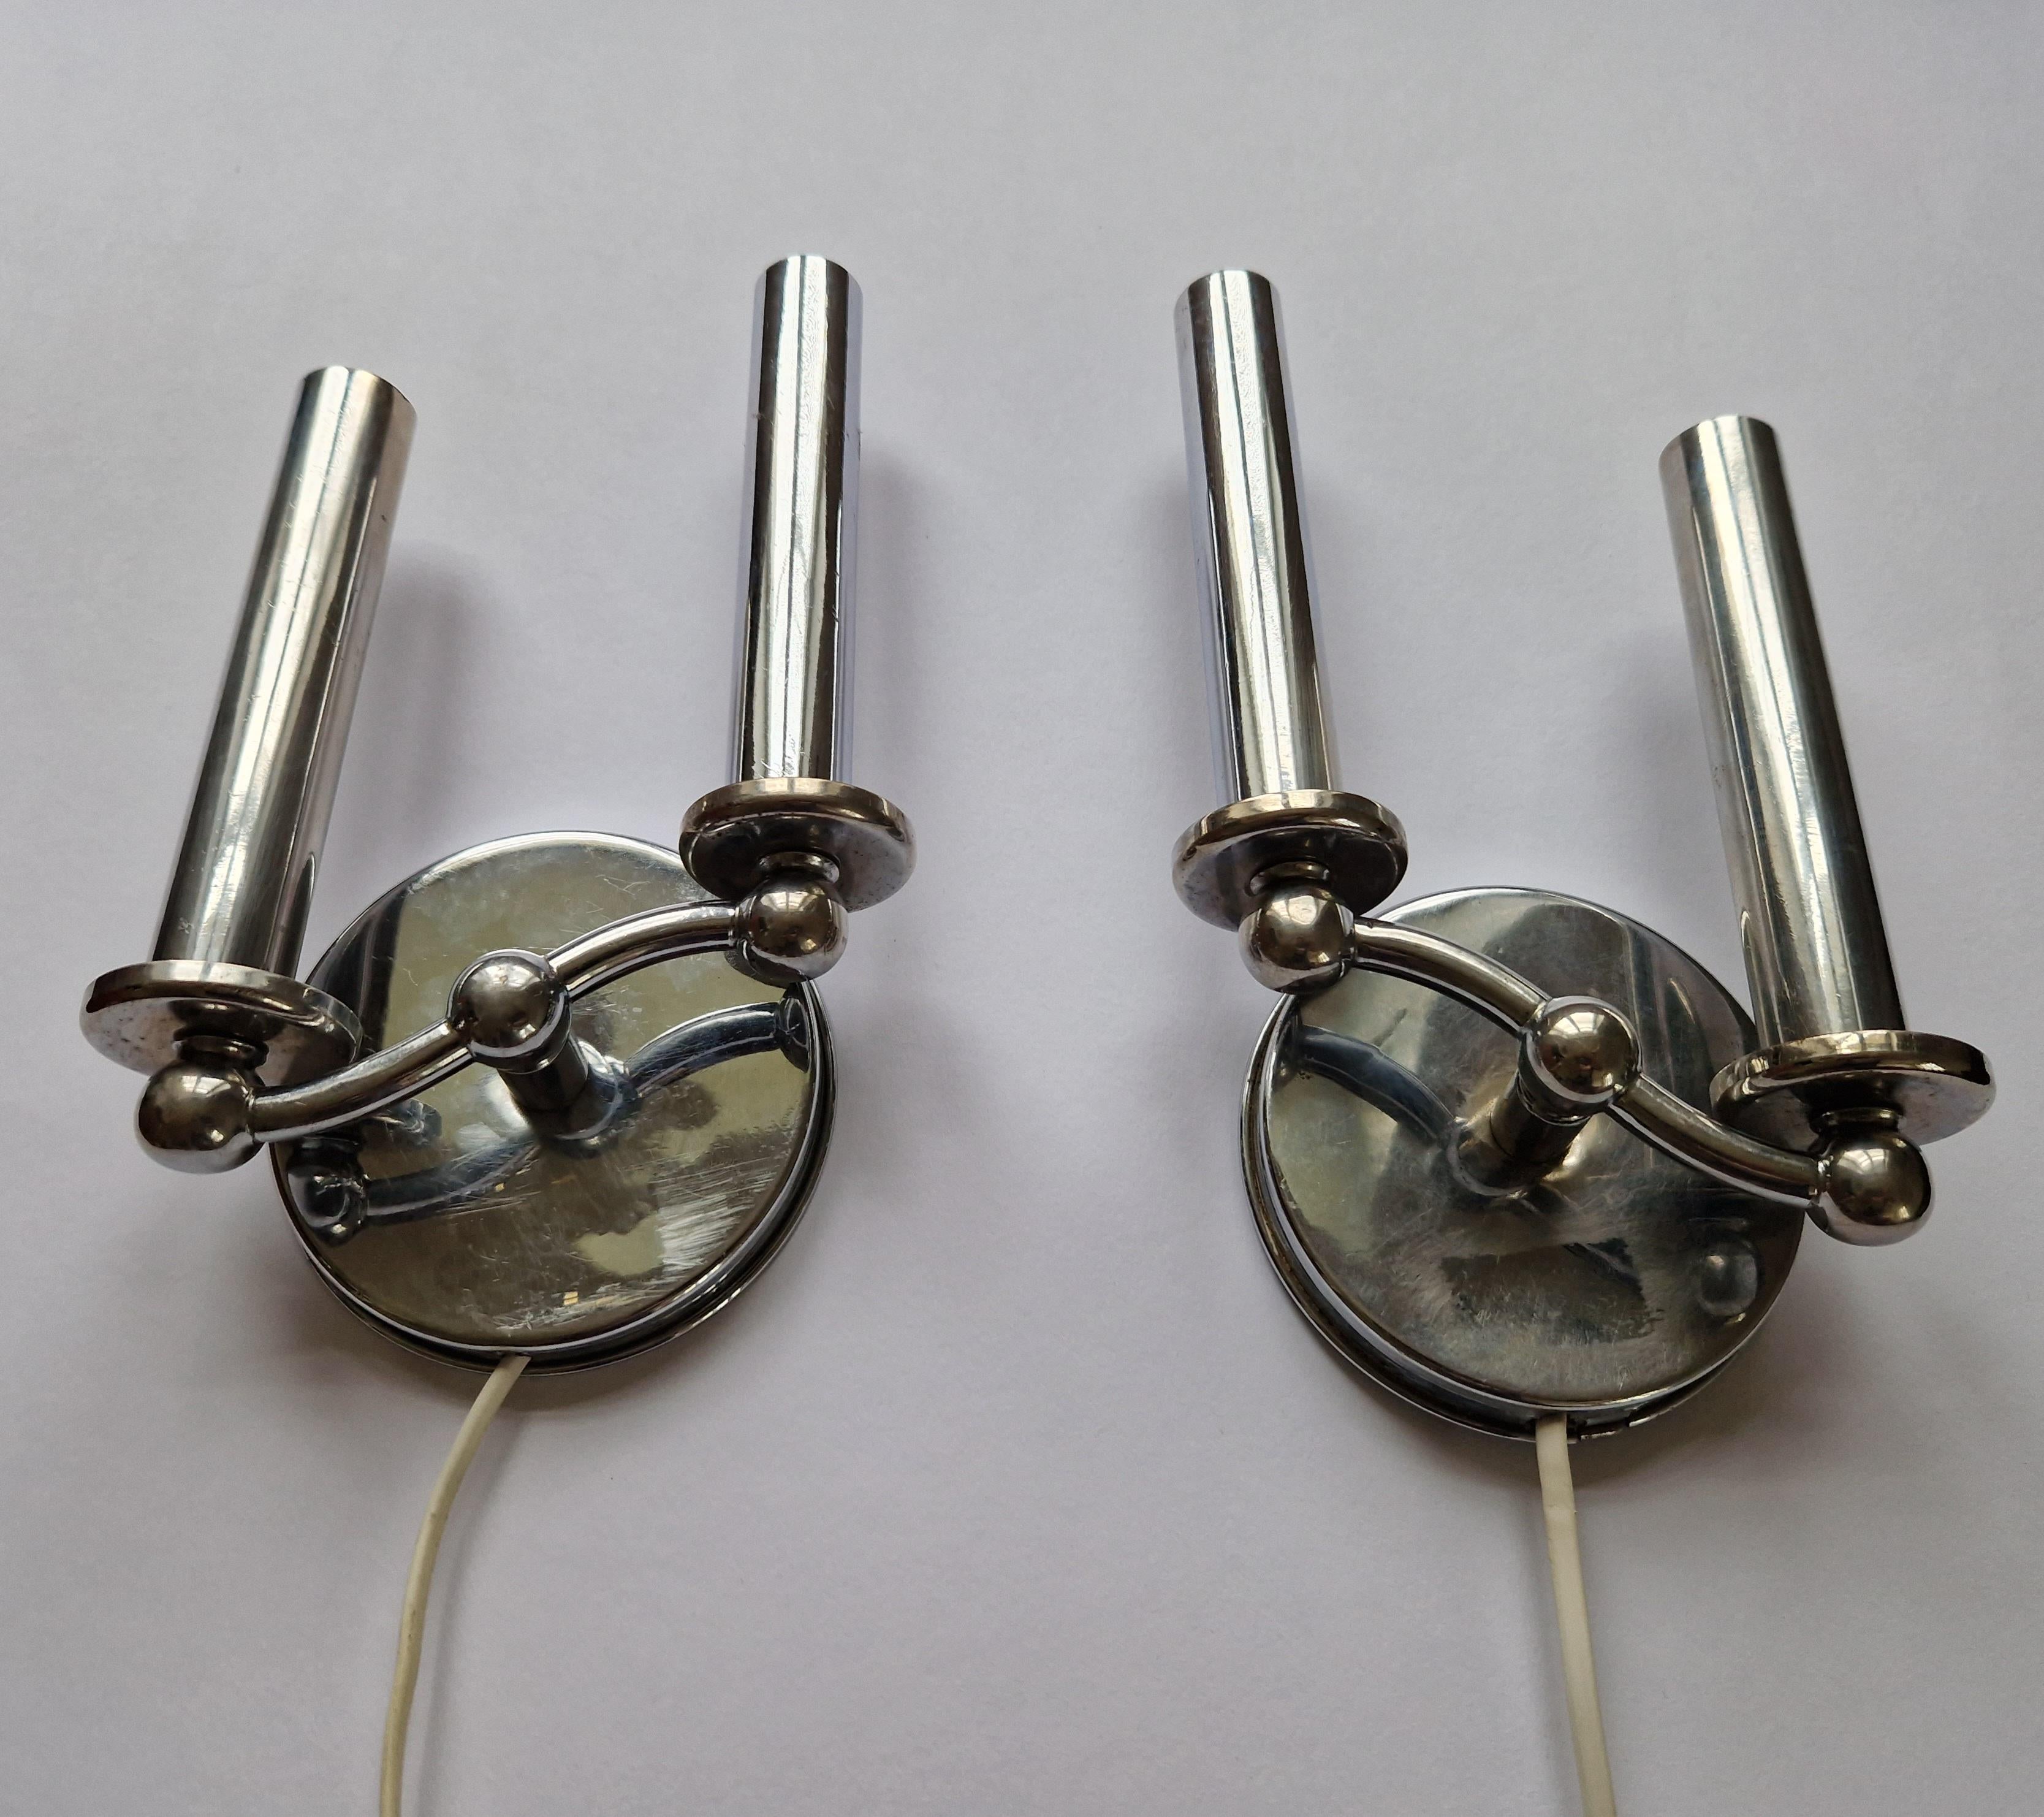 Pair of Rare Chrome Art Deco / Functionalism Wall Lamps, 1930s For Sale 3